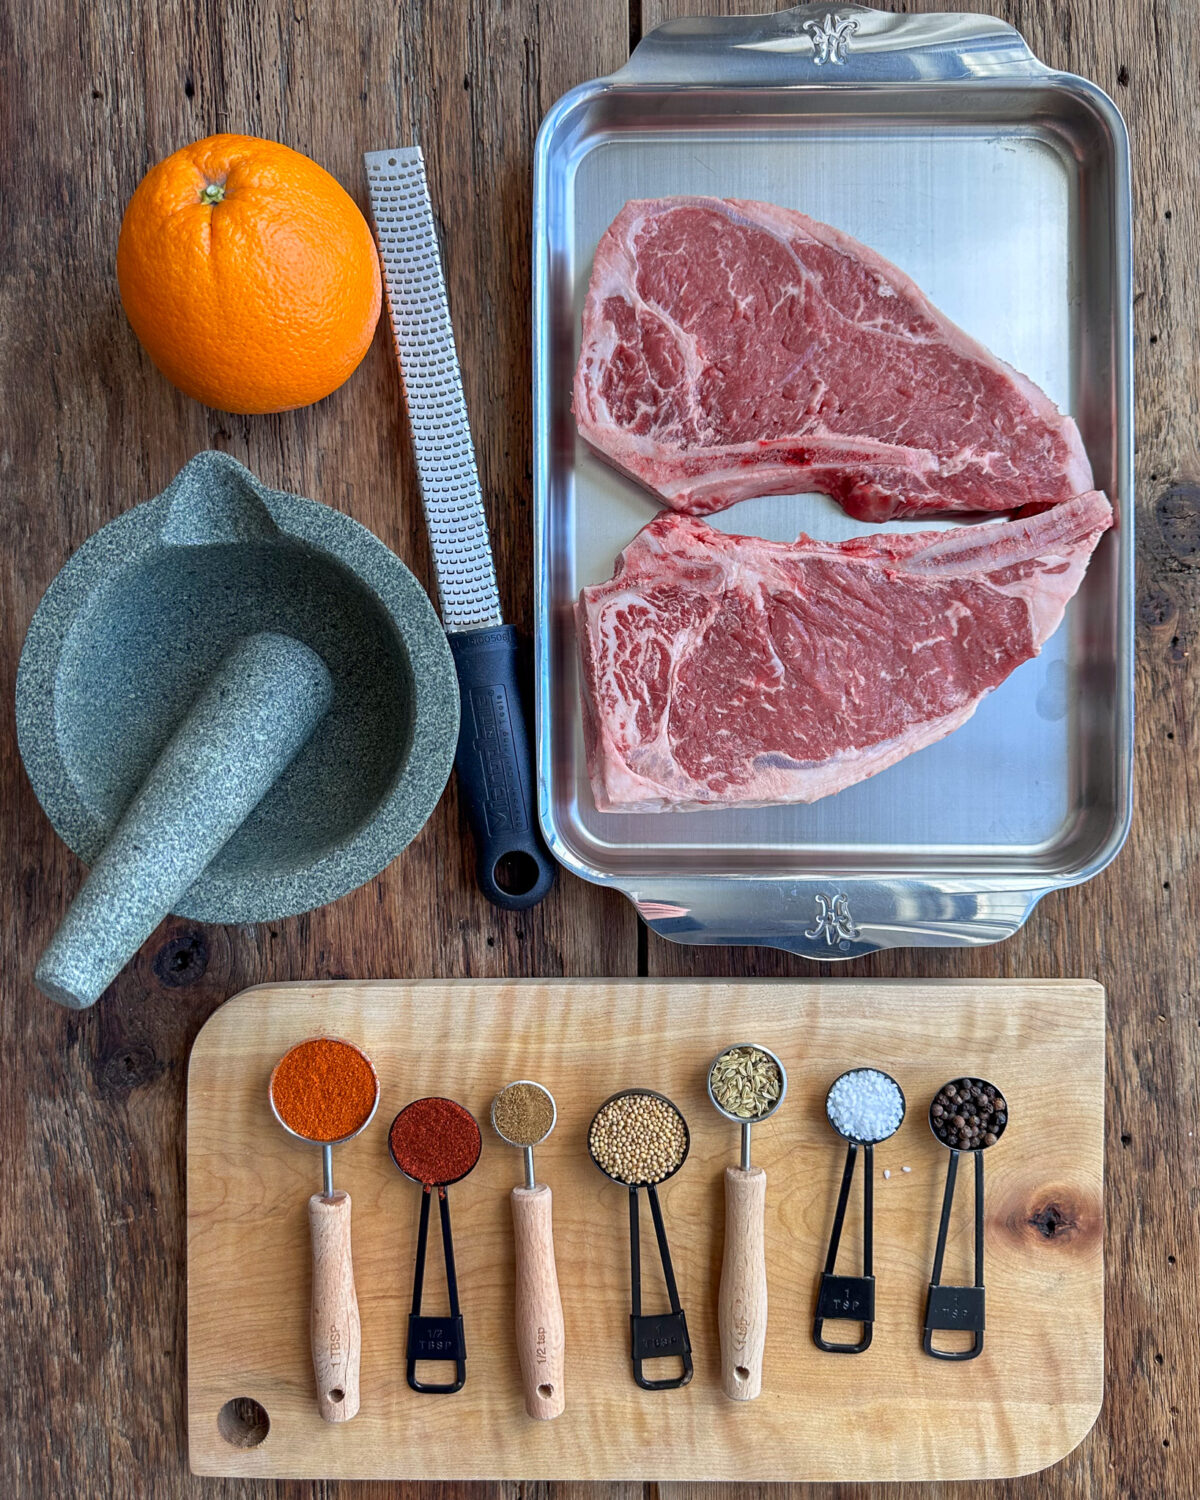 Ingredients for a steak rub: several spices, two steaks, an orange, a mortar and pestle and a micro plane.